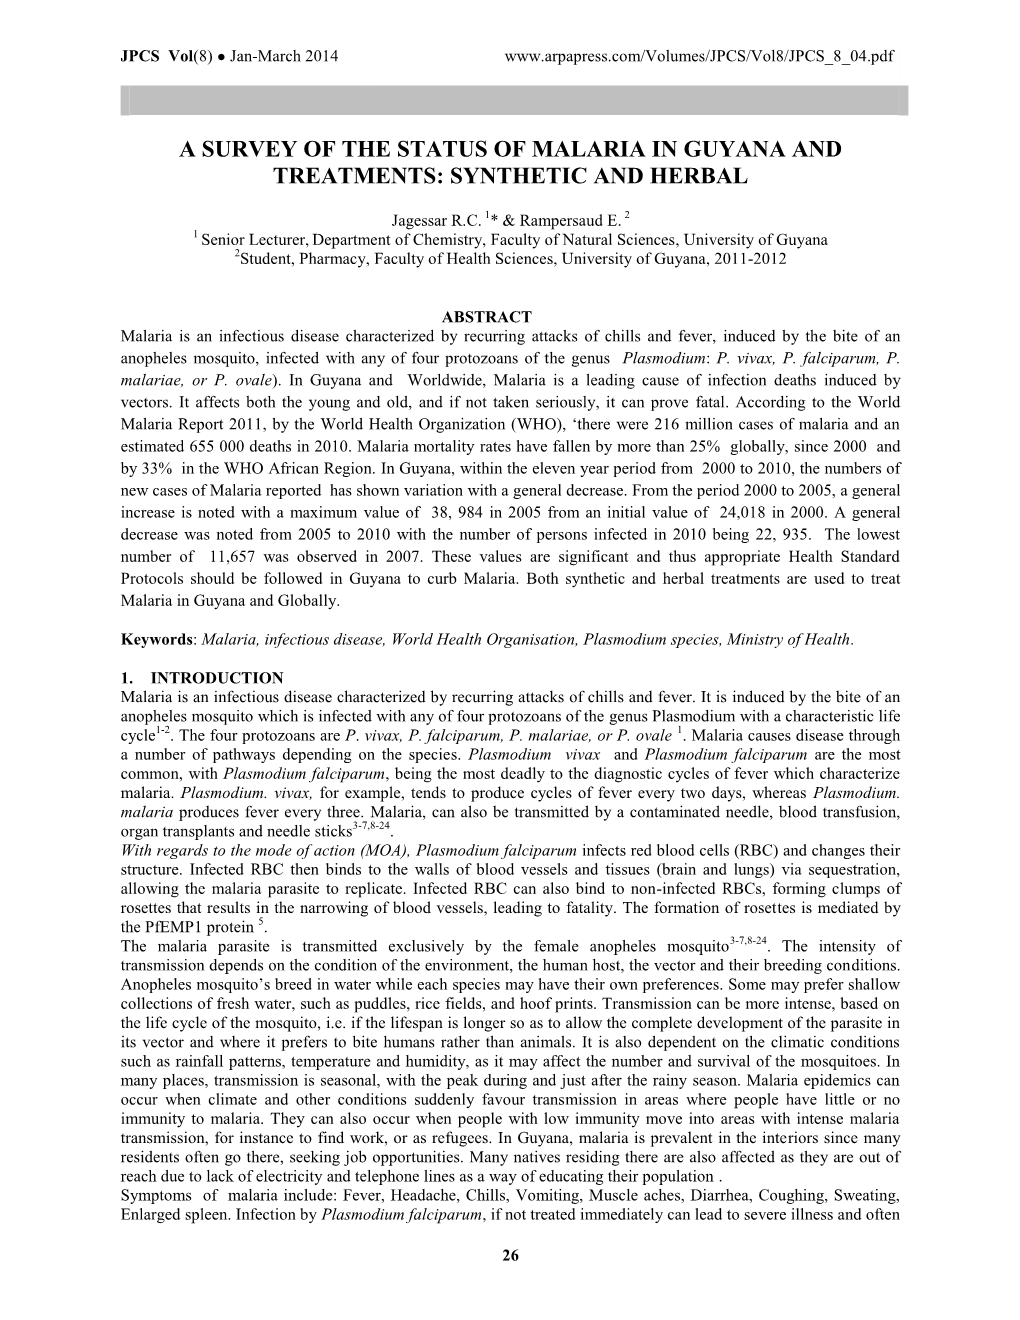 A Survey of the Status of Malaria in Guyana and Treatments: Synthetic and Herbal